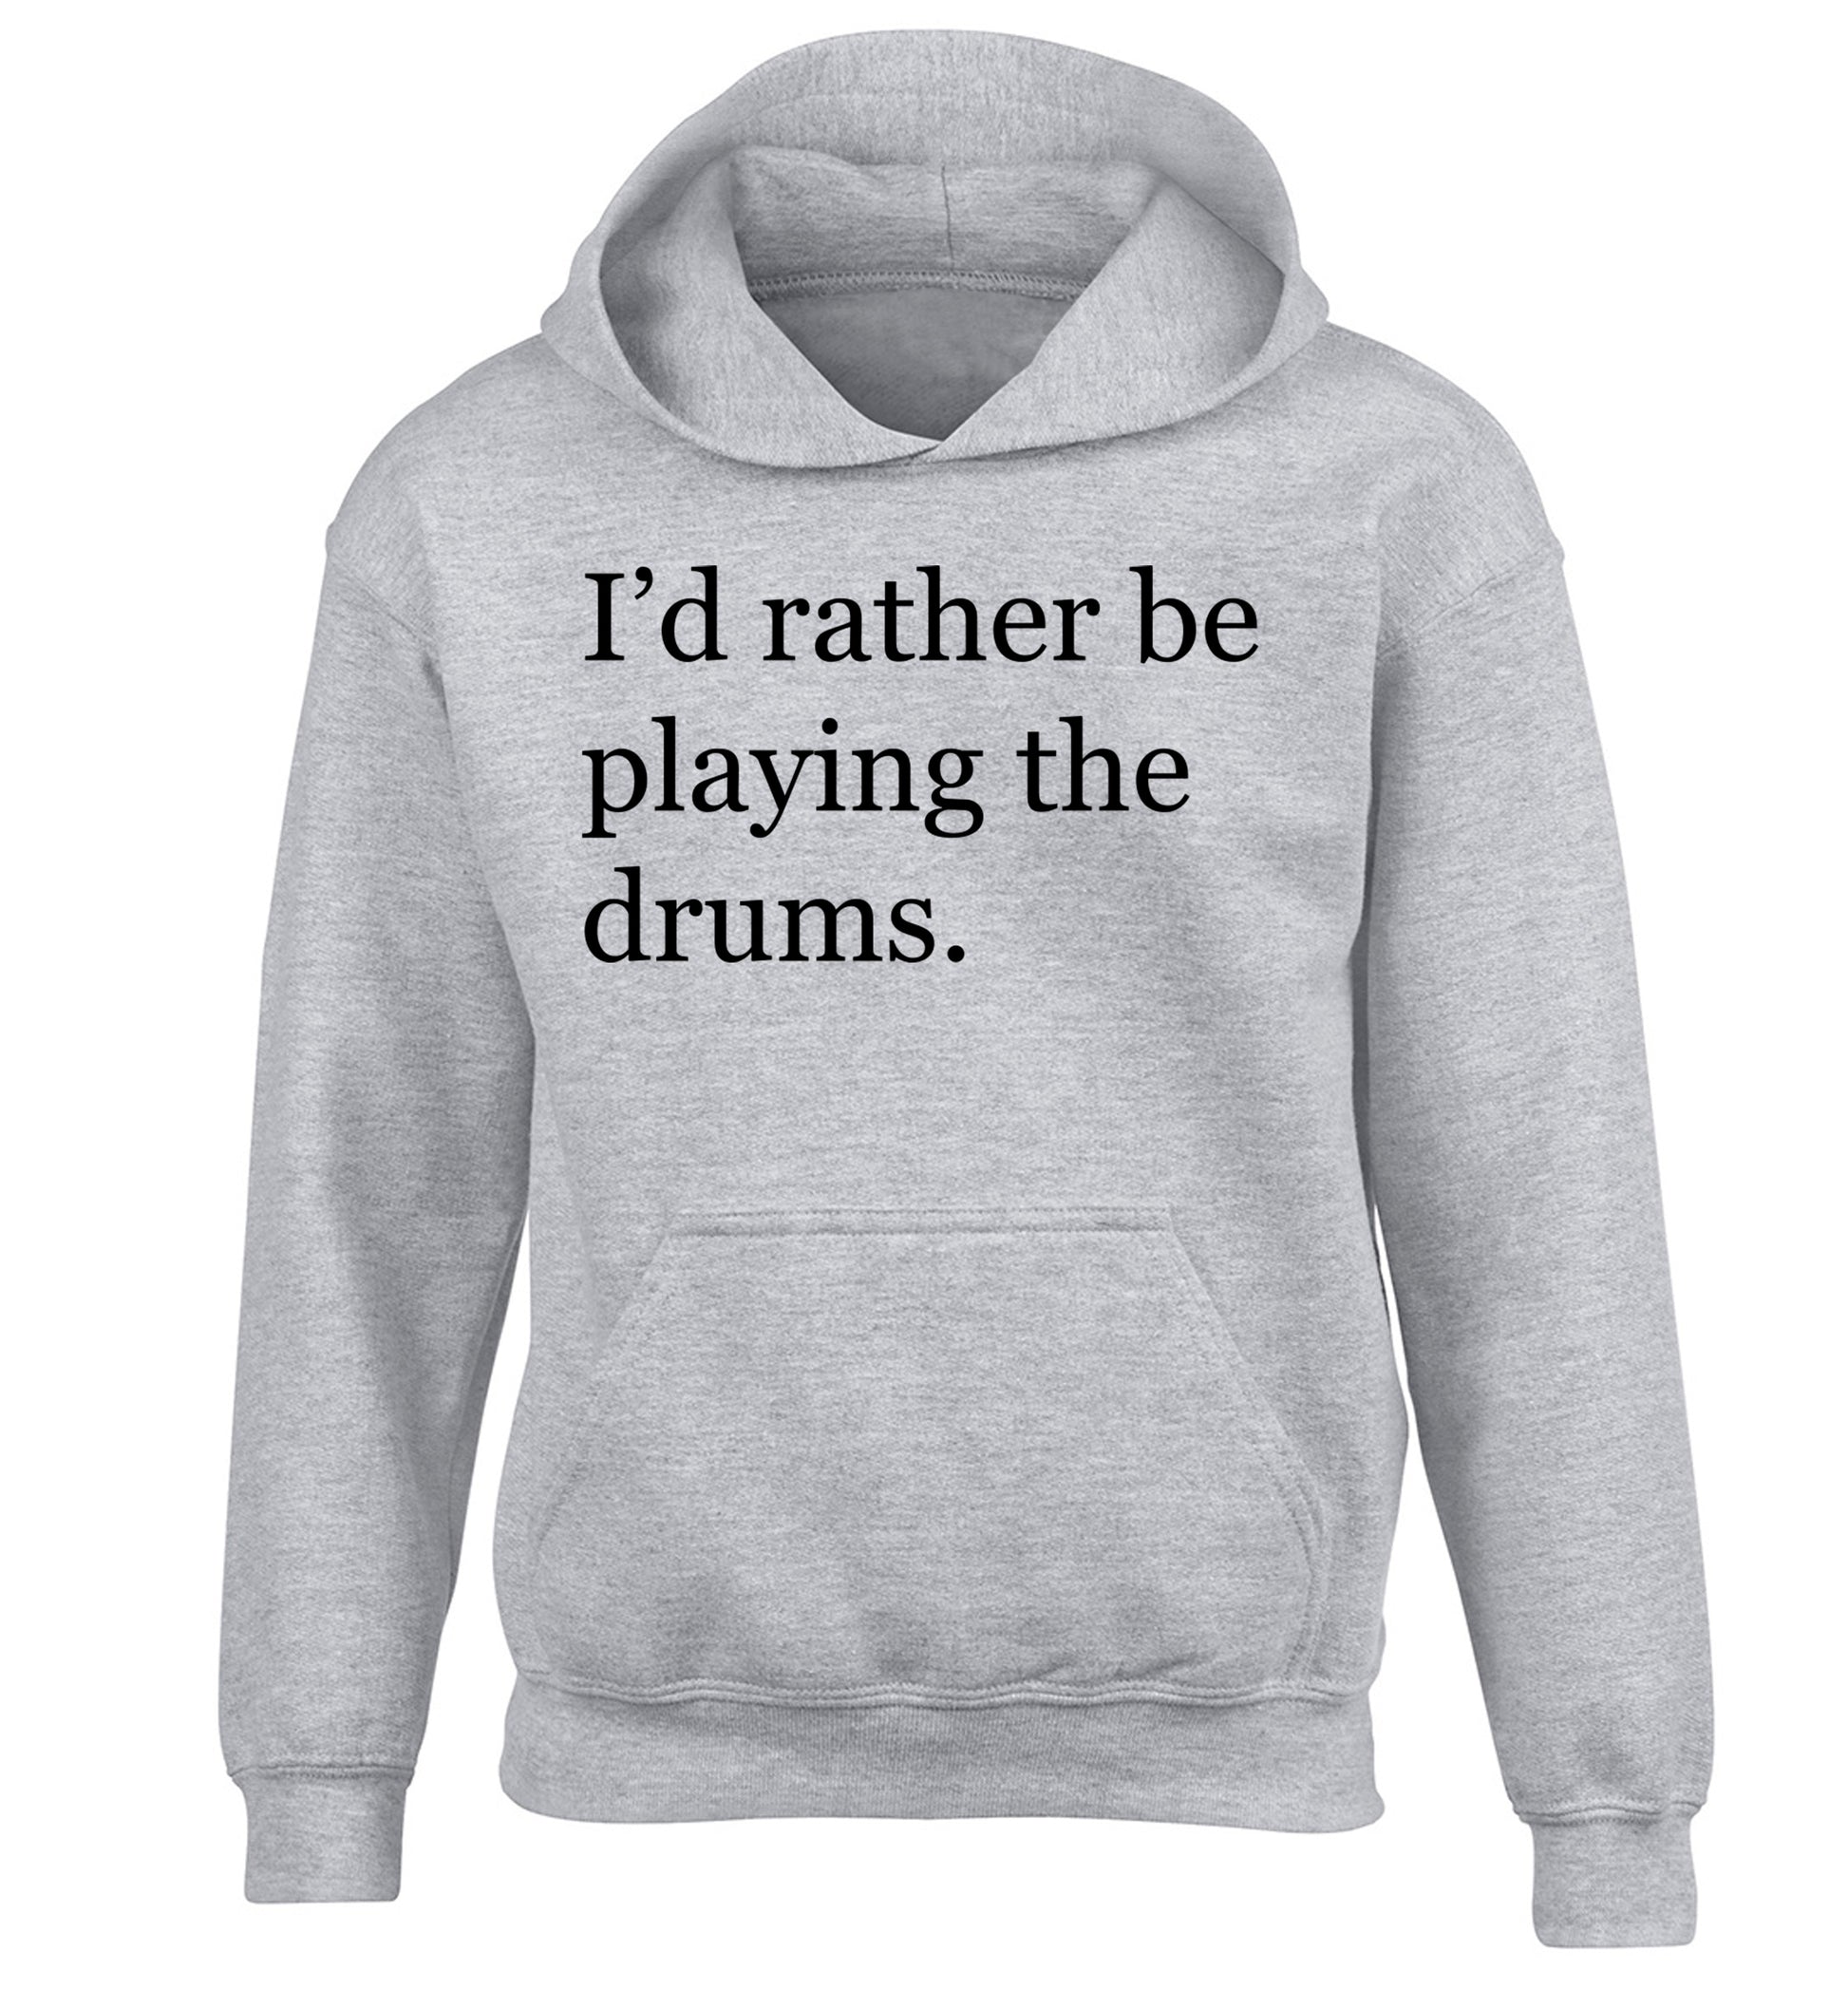 I'd rather be playing the drums children's grey hoodie 12-14 Years